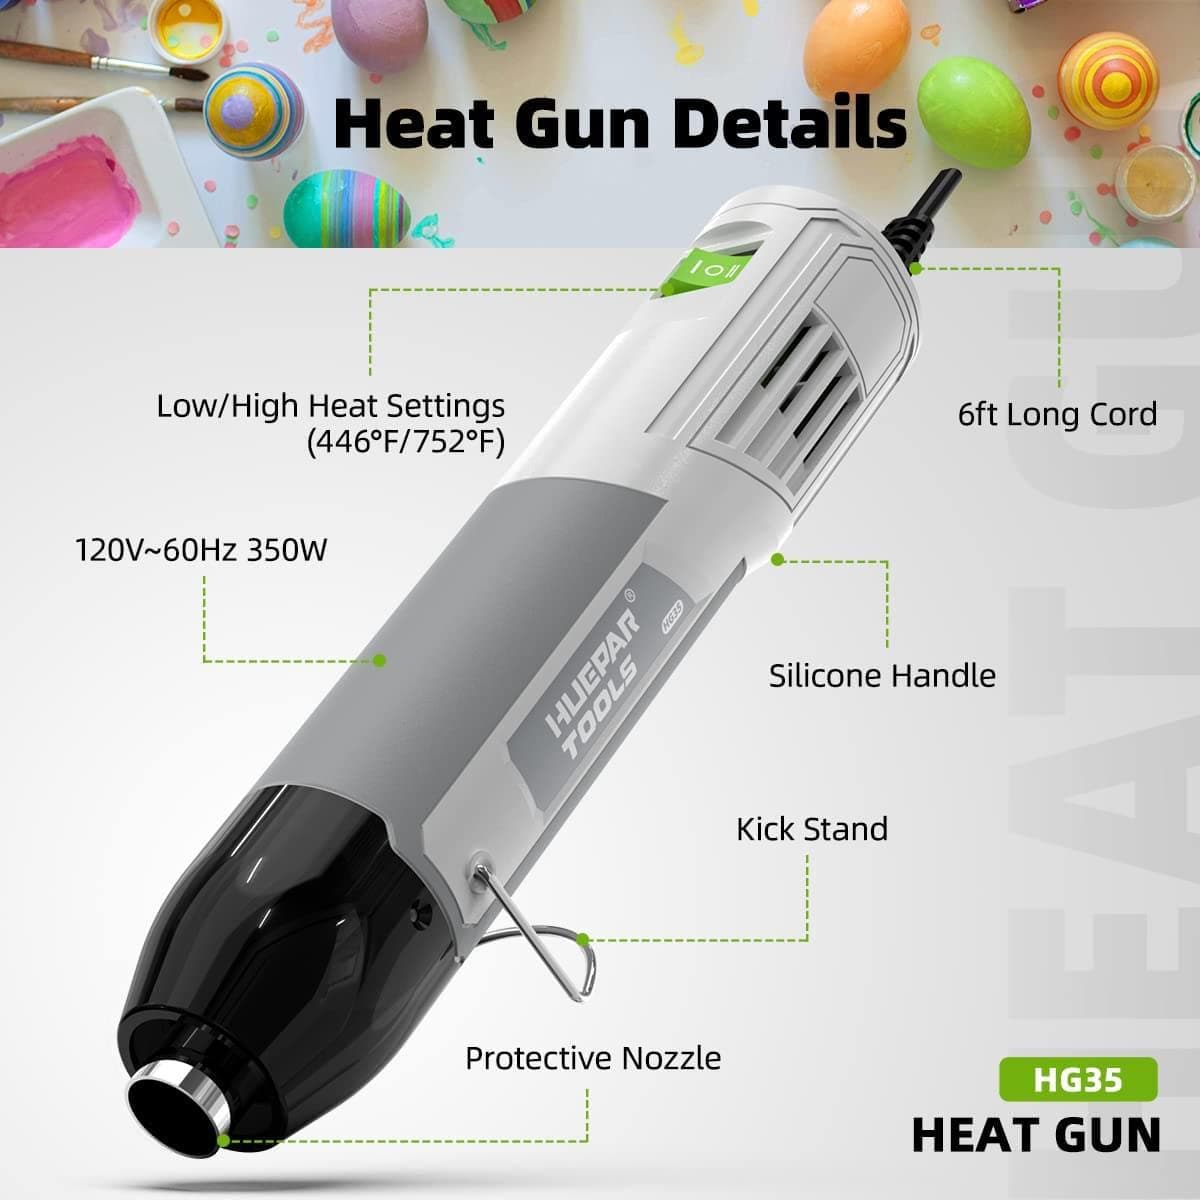 Huepar Tools Mini Dual Temp Heat Gun for Crafts with Shrink Wrapping, Embossing, Candle Making Accessories, Including Heat Shrink Tubes, Silicon Brushes, and Nozzles7